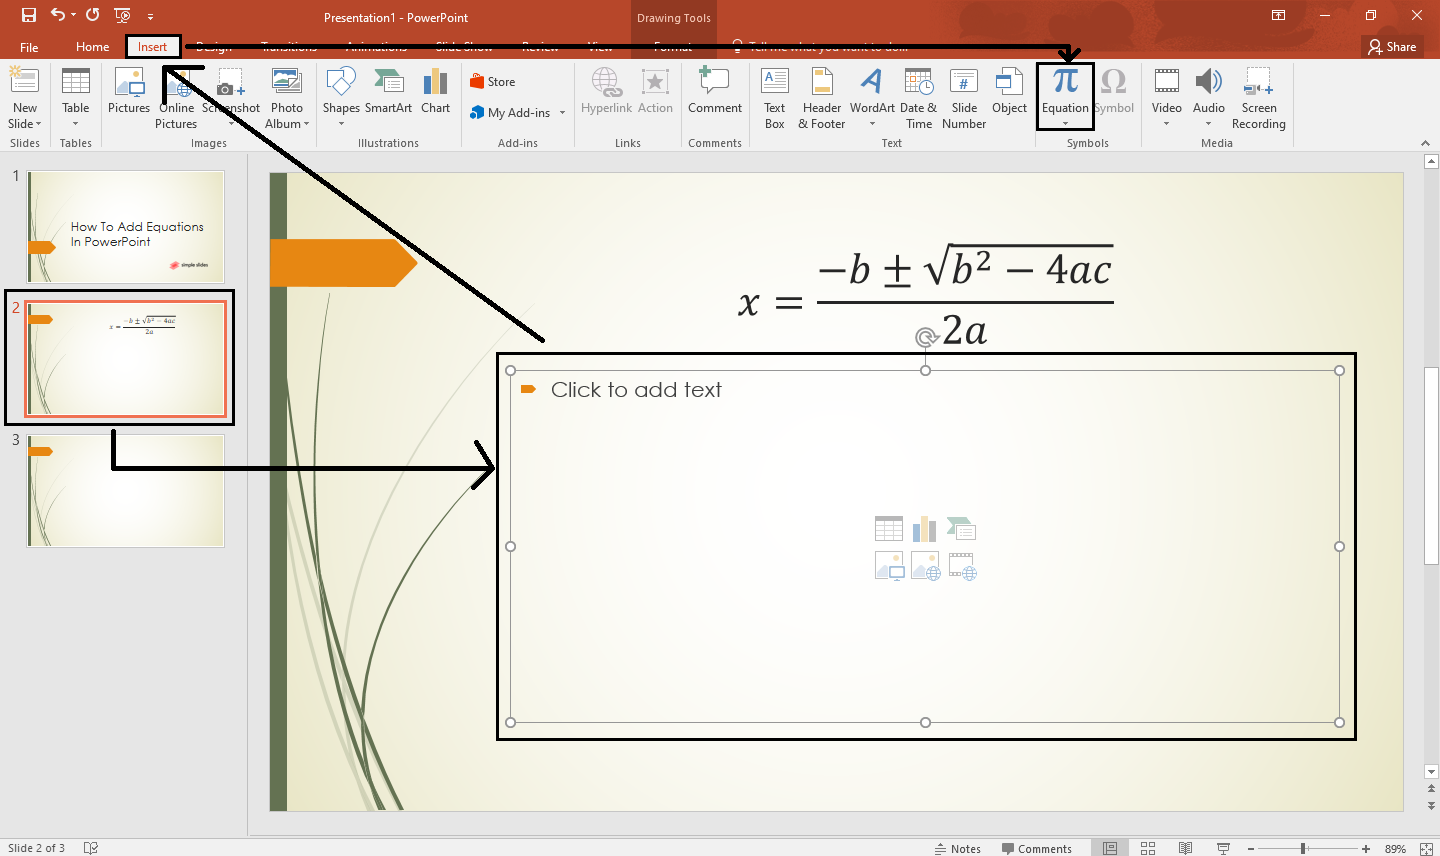 In the existing PowerPoint slide, click "Insert" tab and select "Equation" button.